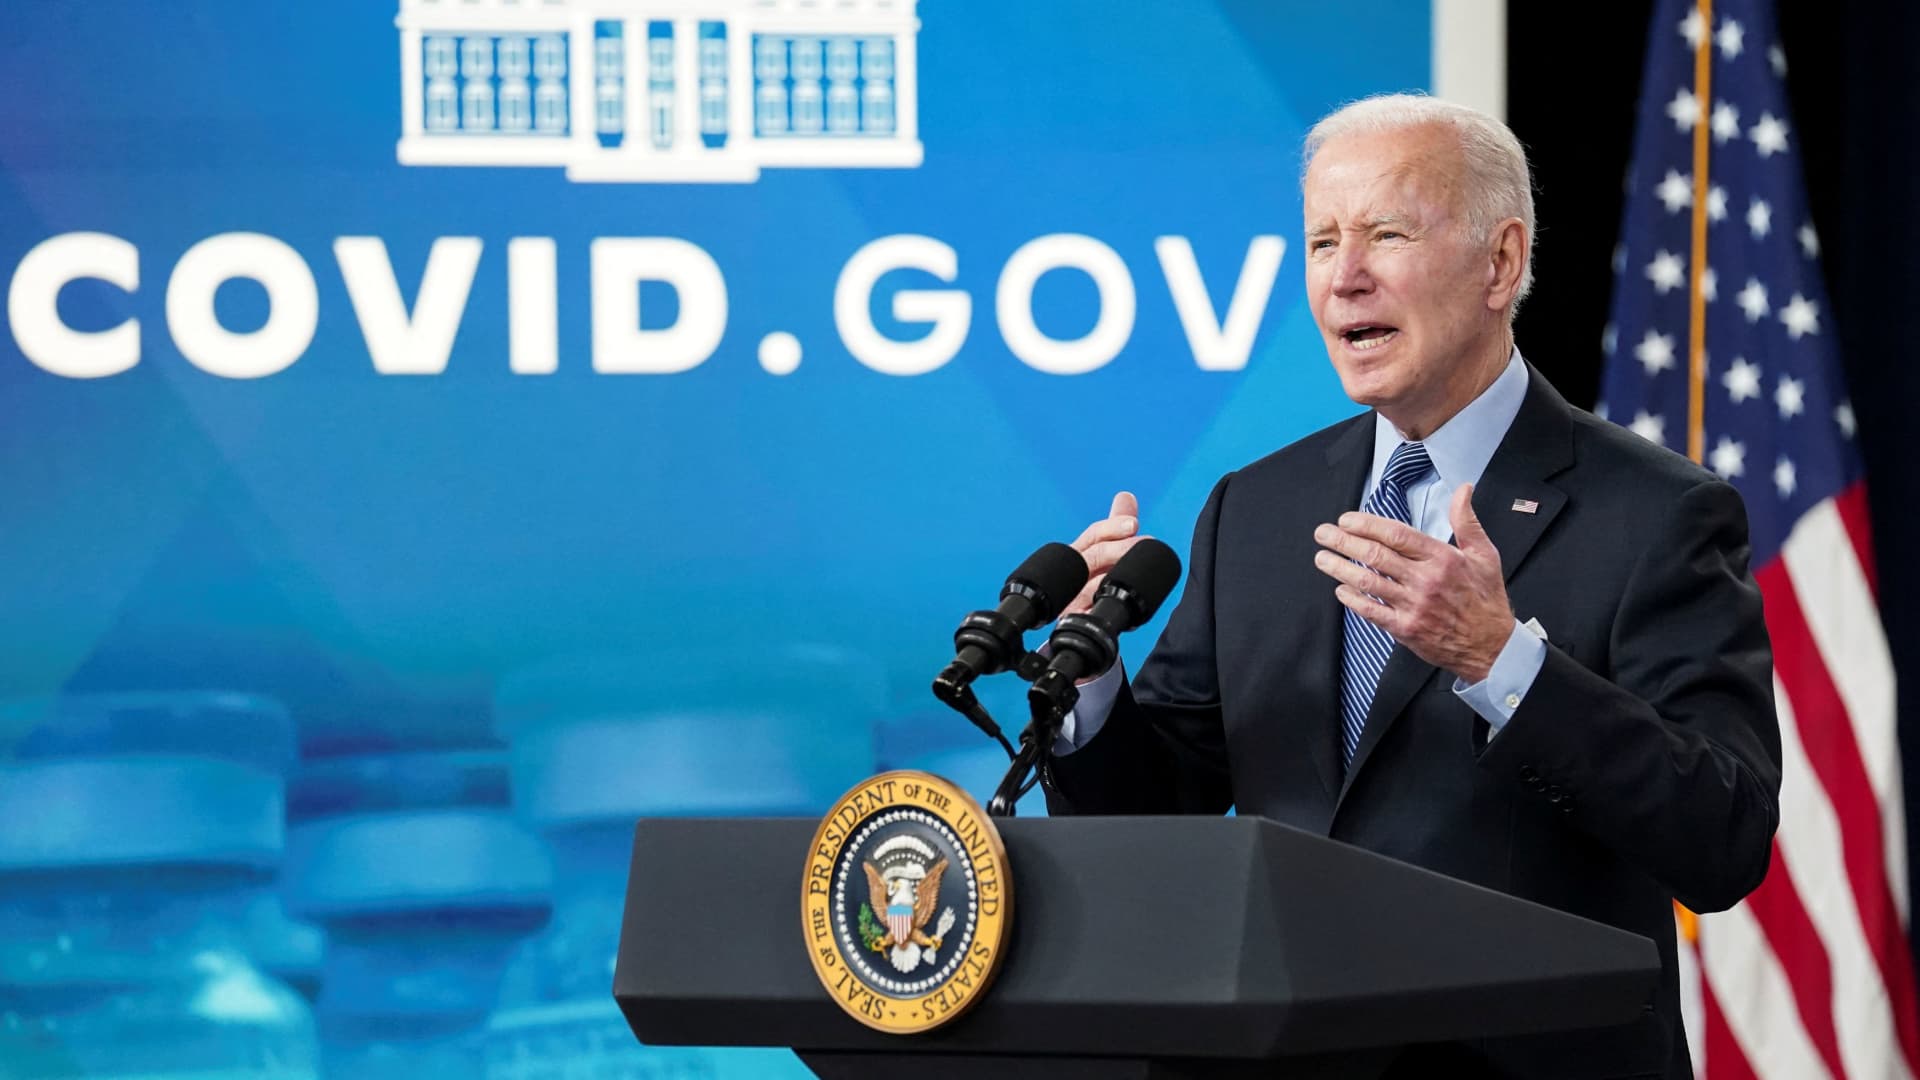 Biden administration launches long Covid research plan